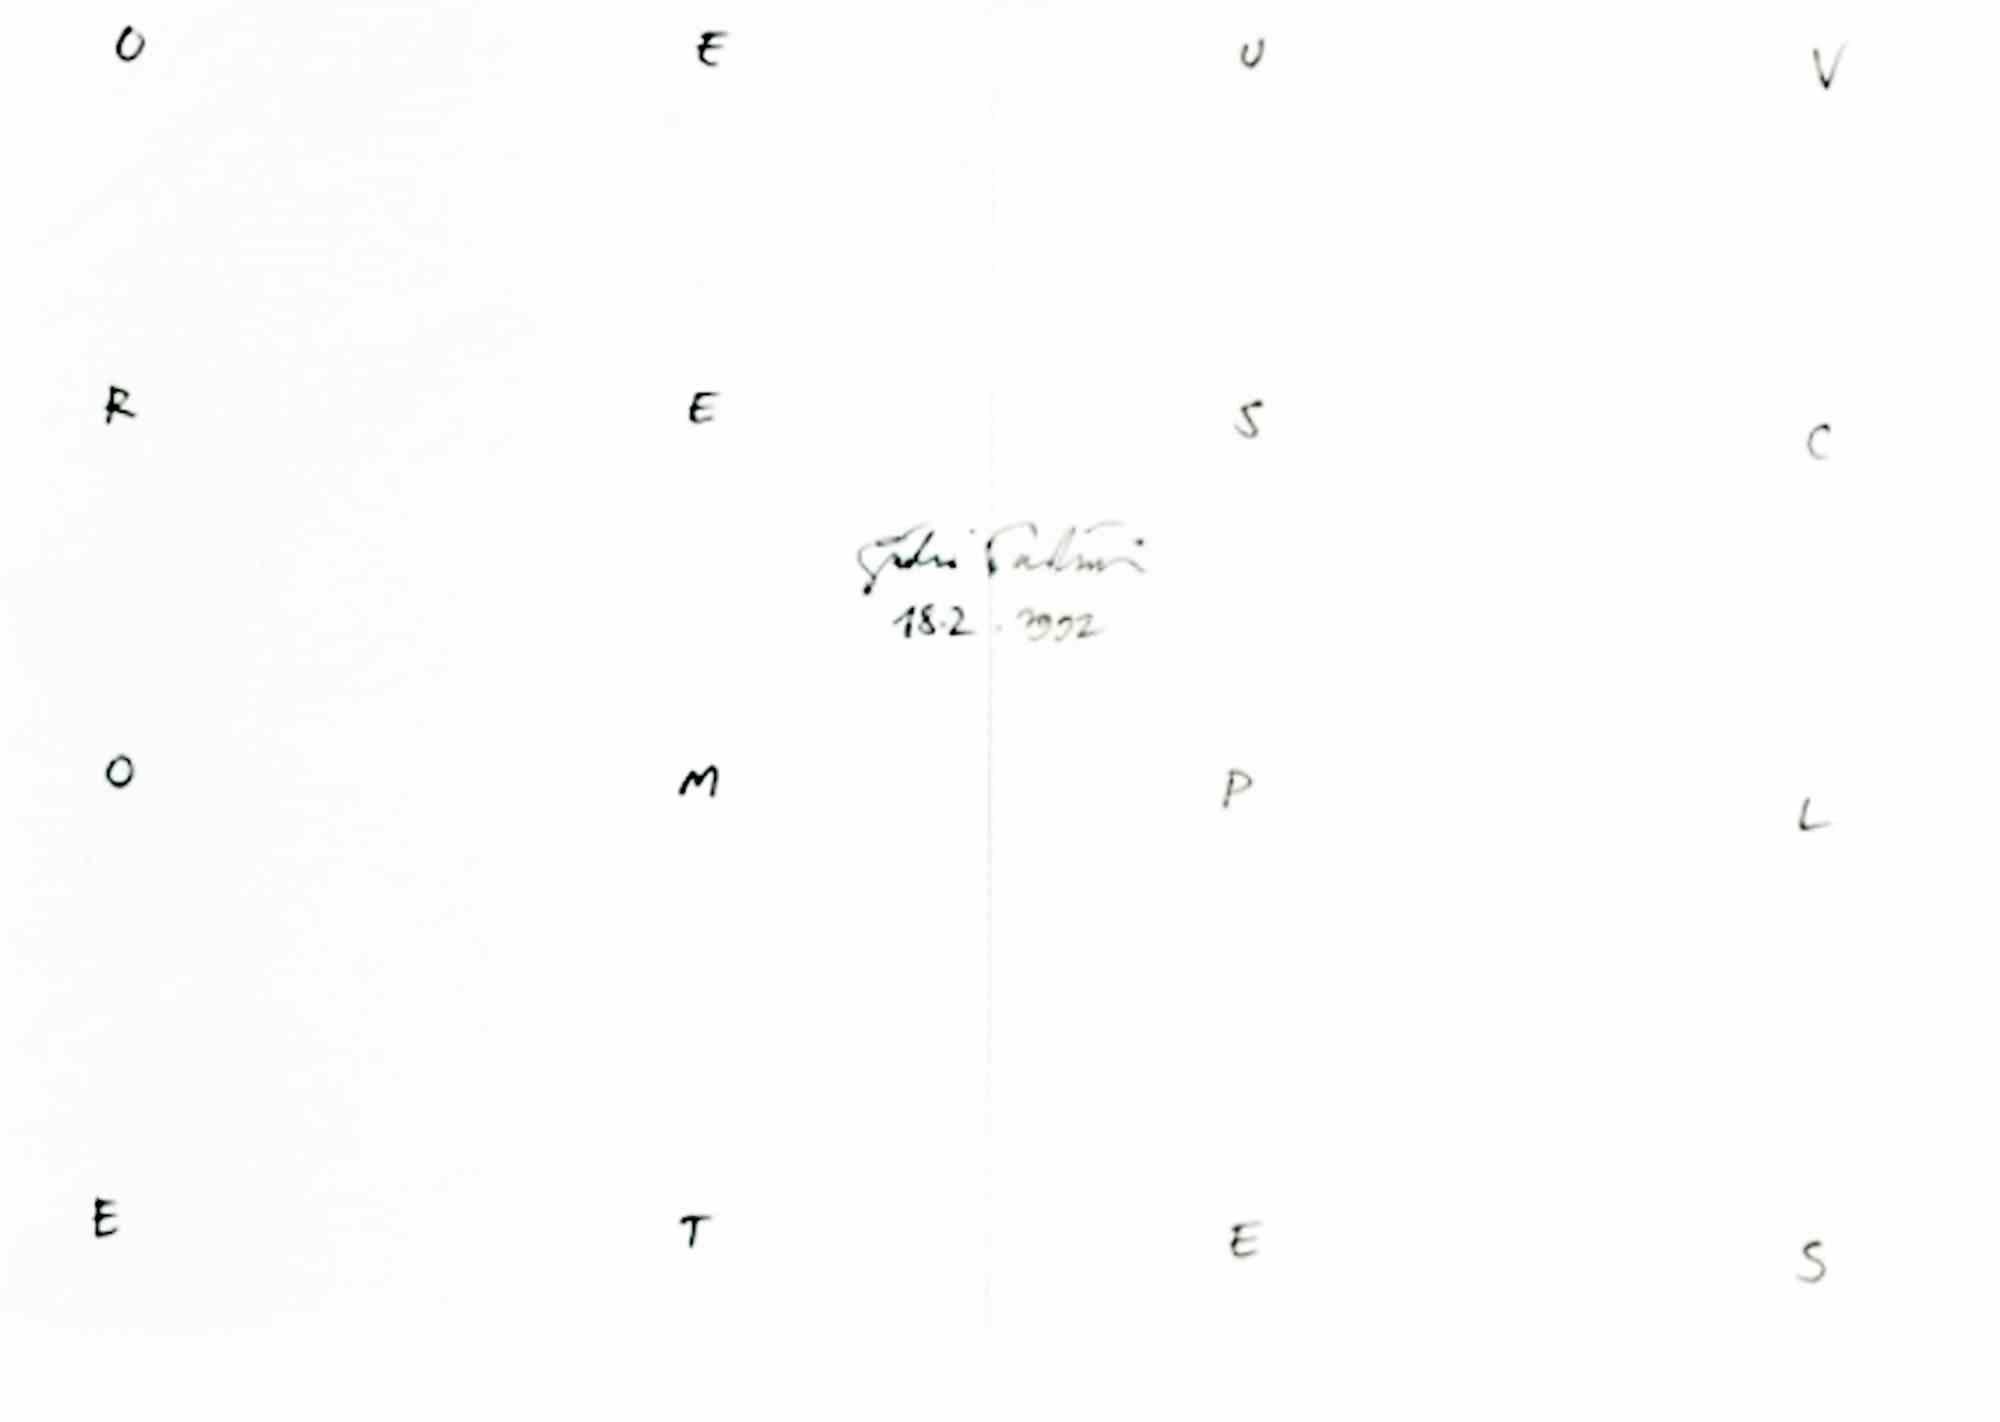 Oeuvres Completes is an original contemporary artwork realized by Giulio Paolini in 1992.

Ink on paper. Certificate of authenticity by the Artist.

Giulio Paolini (Genova, 5 November 1940) is one of the most significant conceptual artists of the